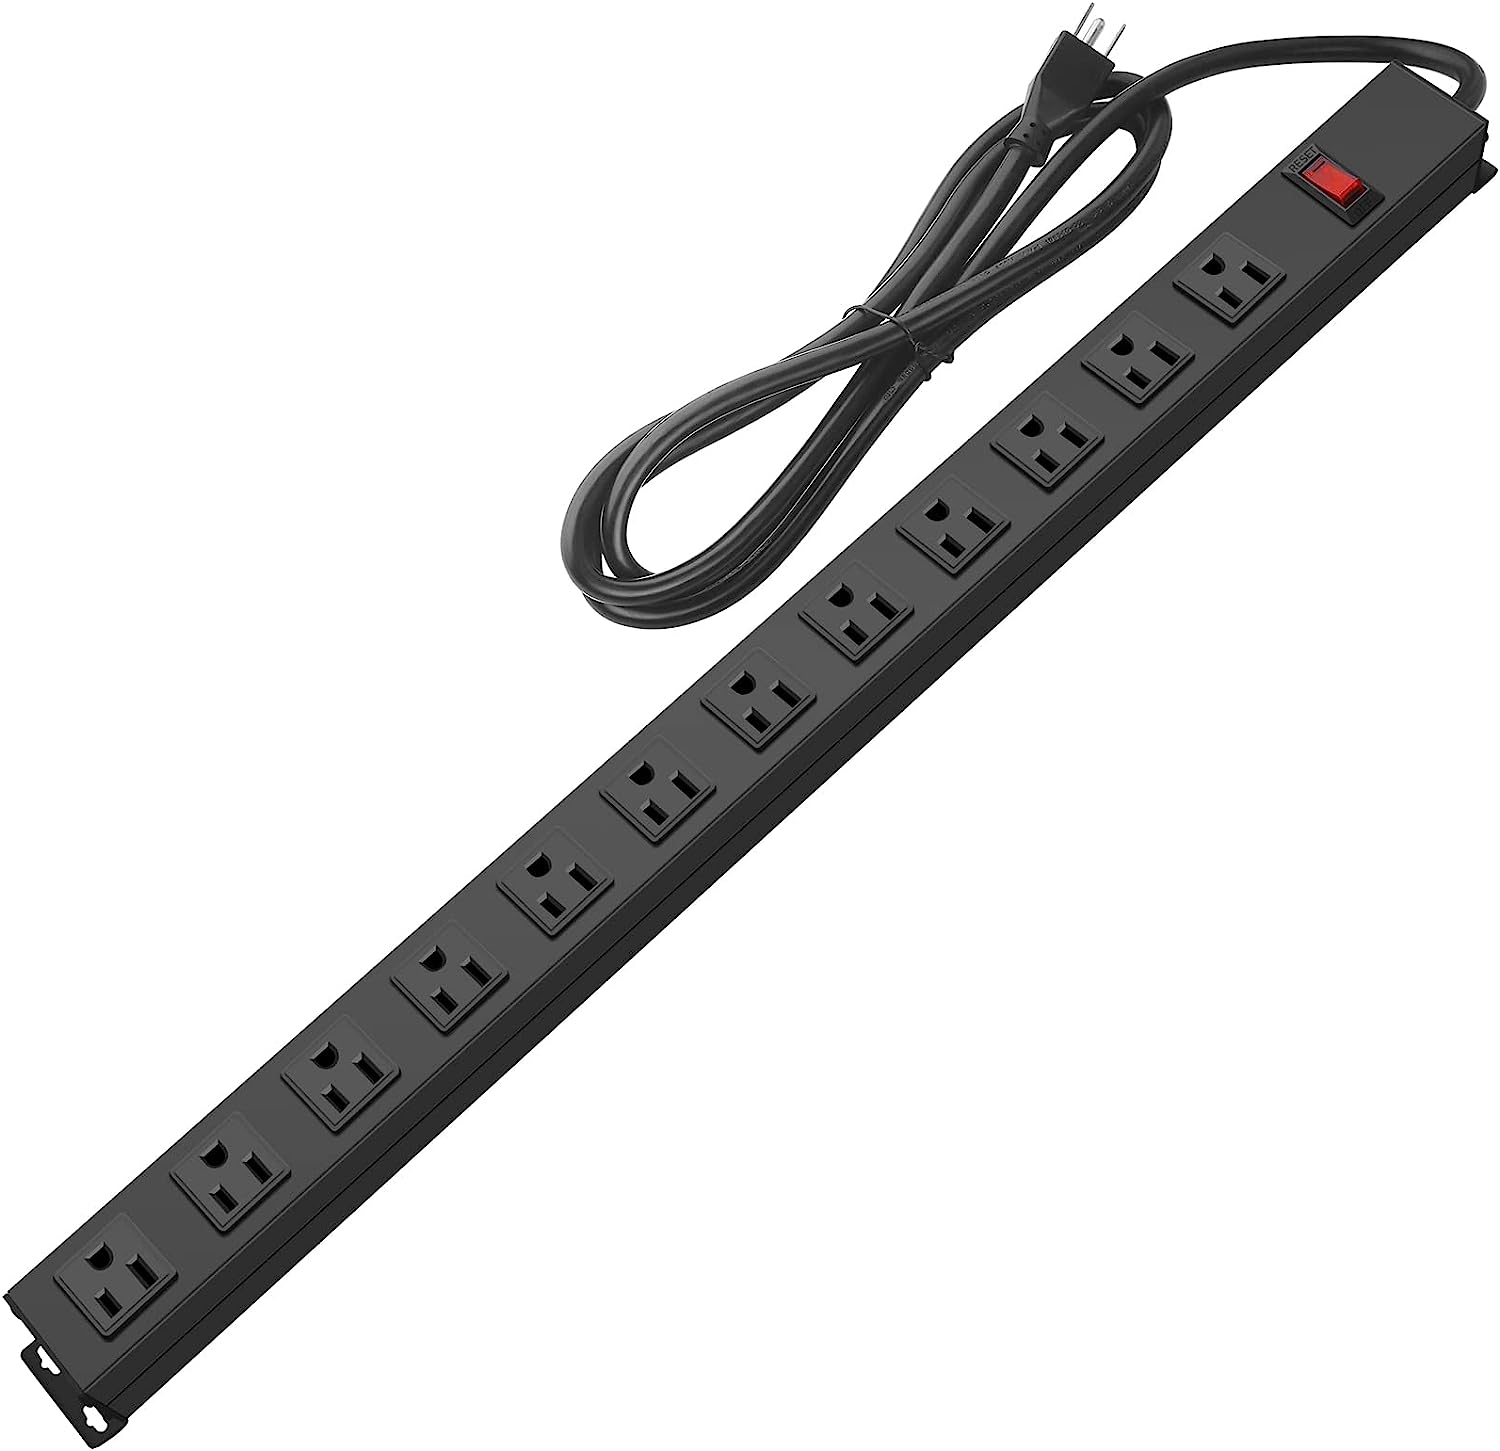 Metal Wall Mount Power Strip, Mountable Power Outlet [...]